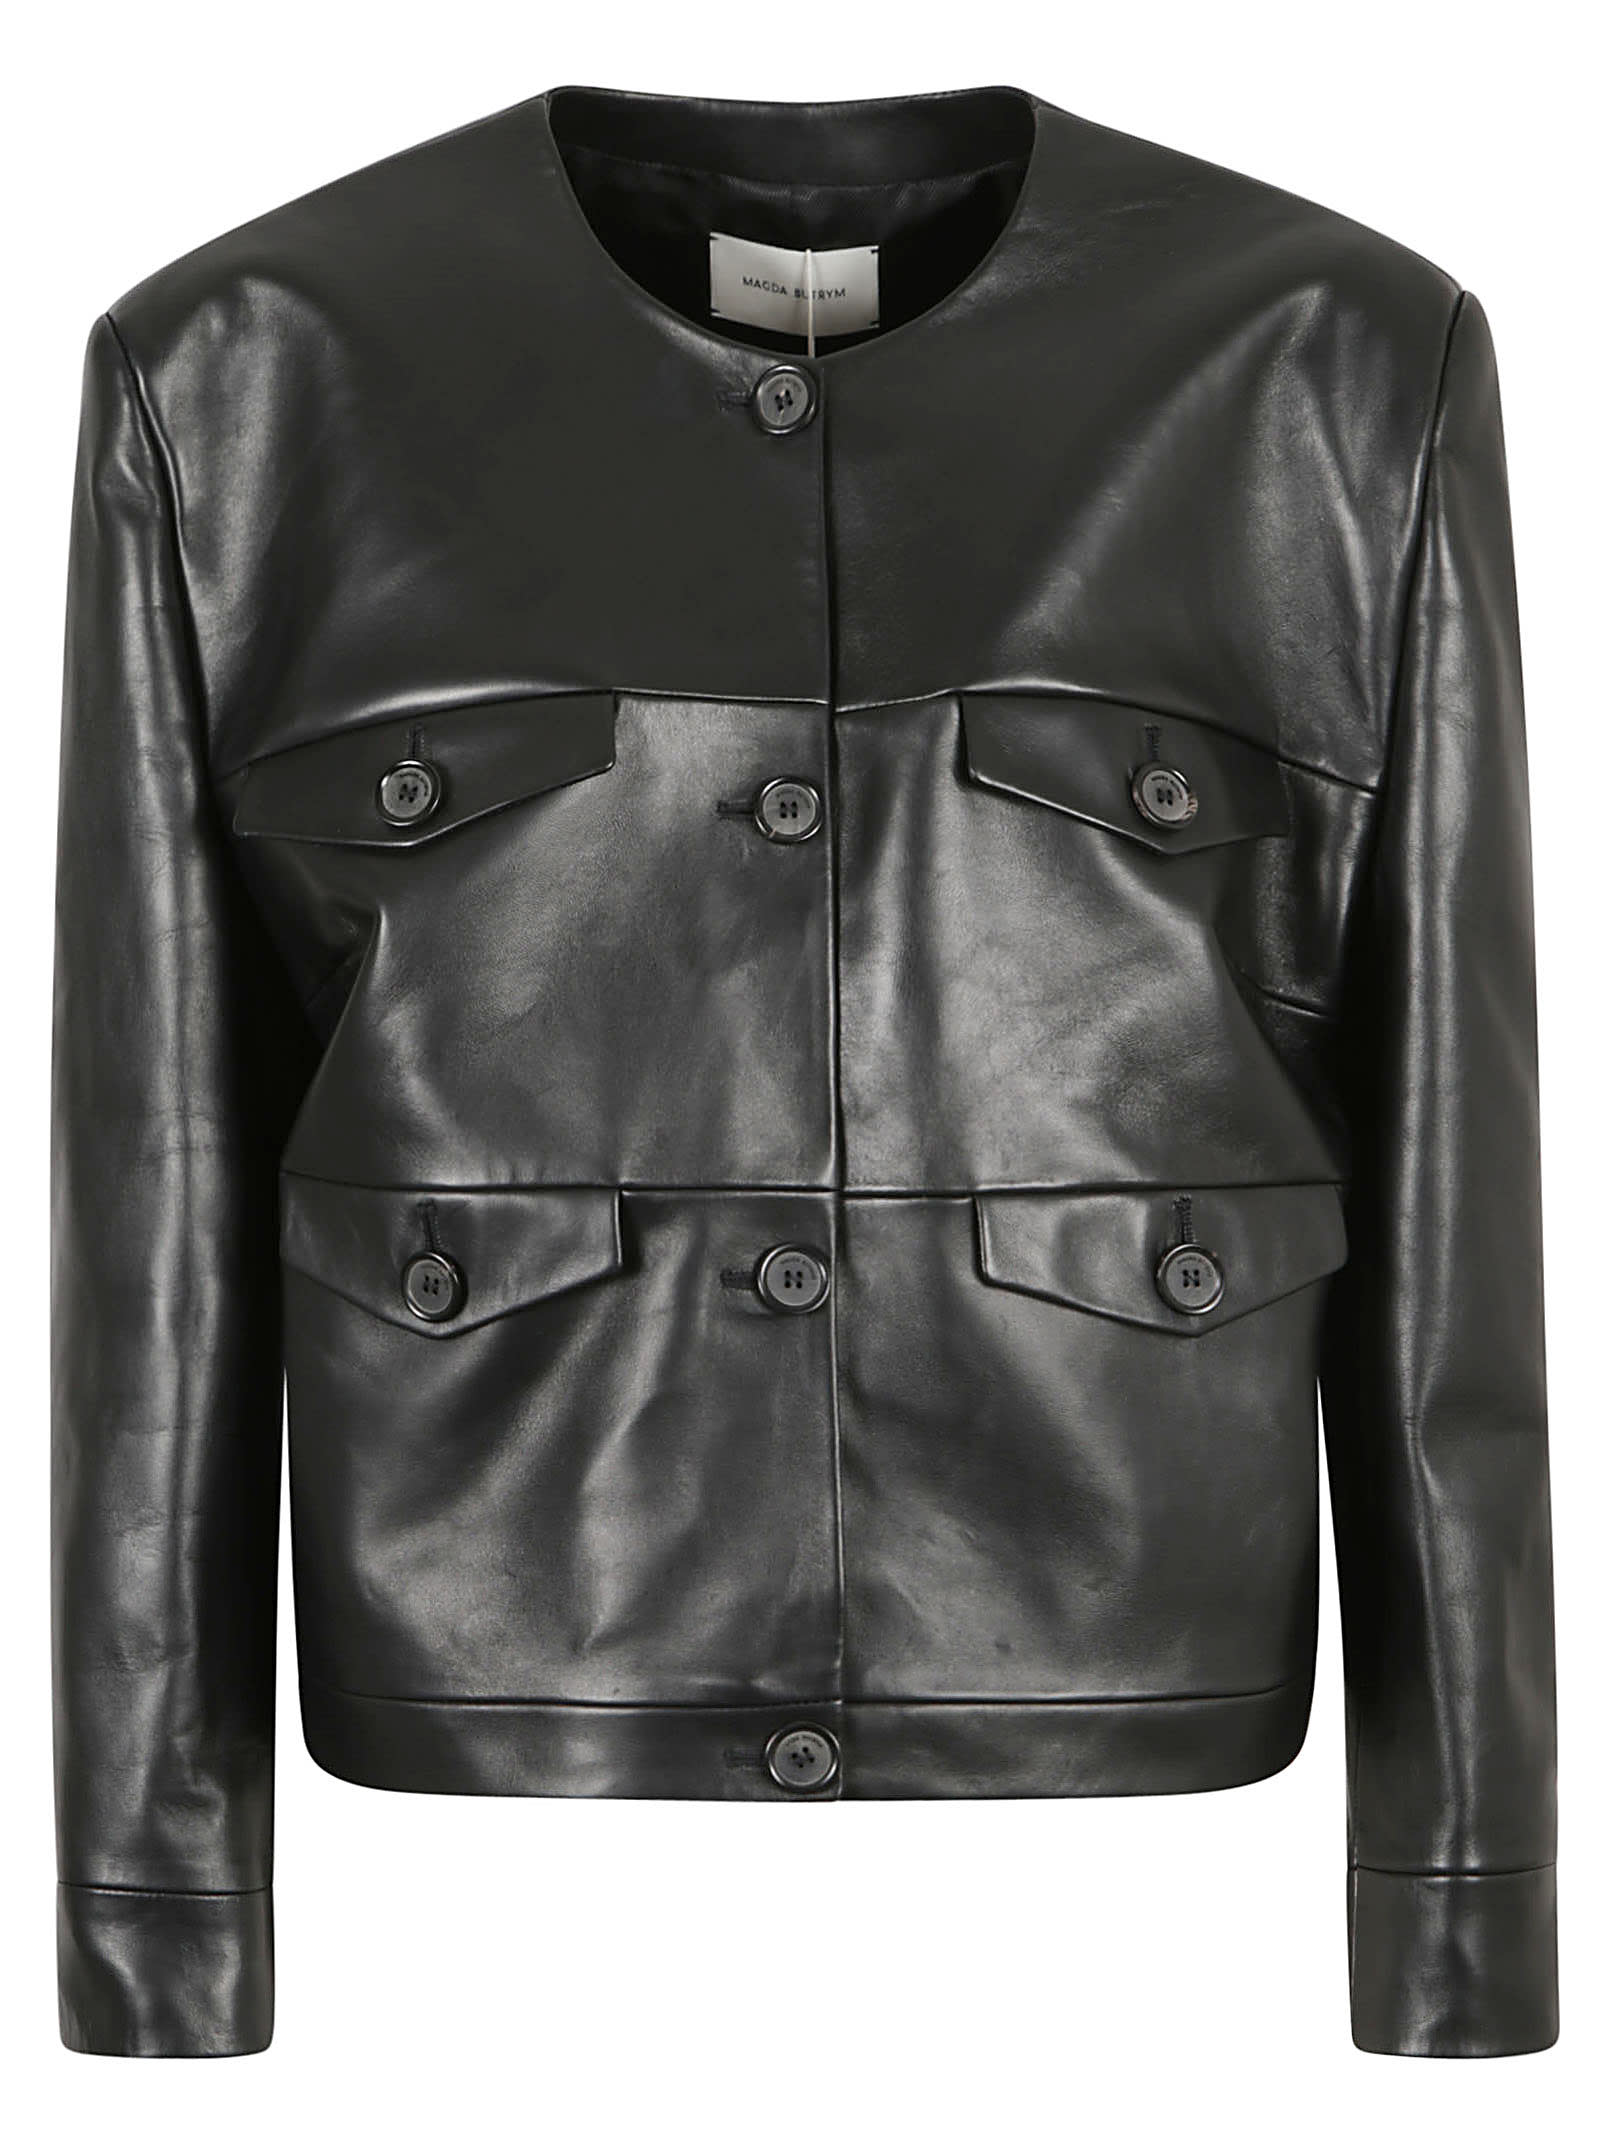 4 Pockets Buttoned Leather Jacket